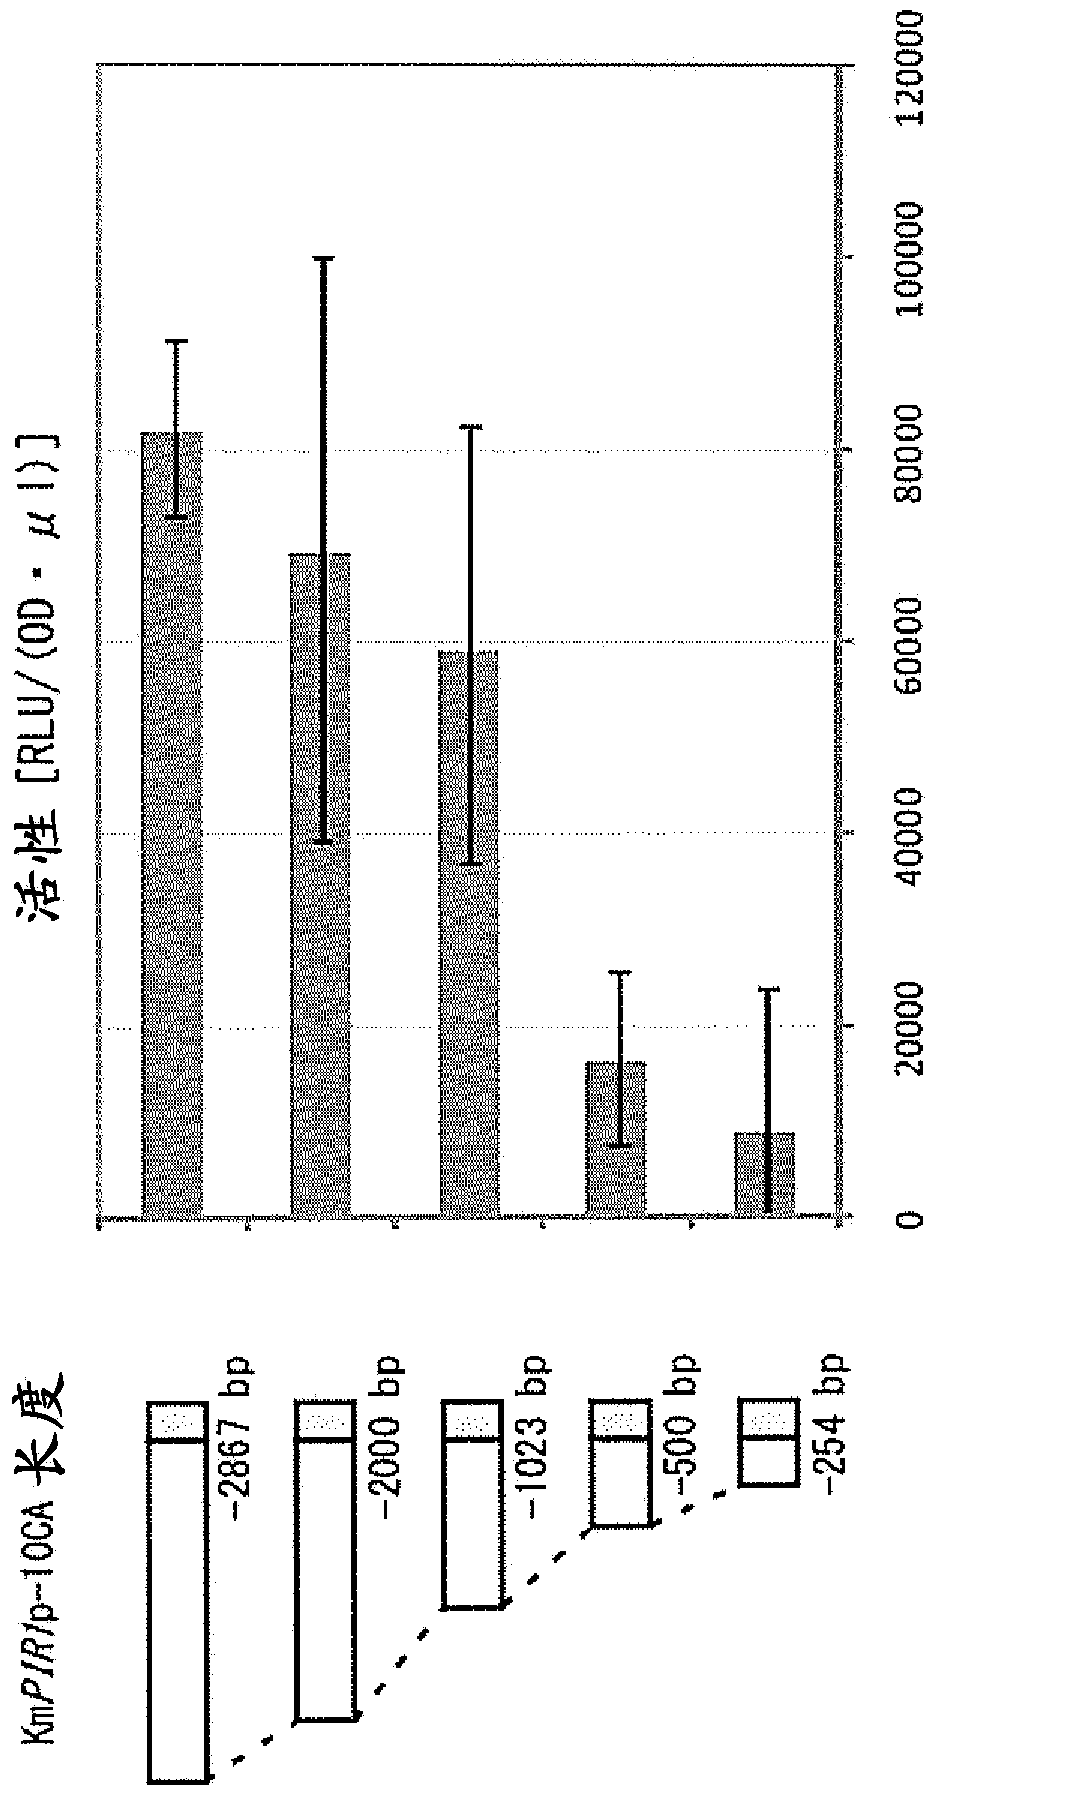 Novel promoter and use thereof